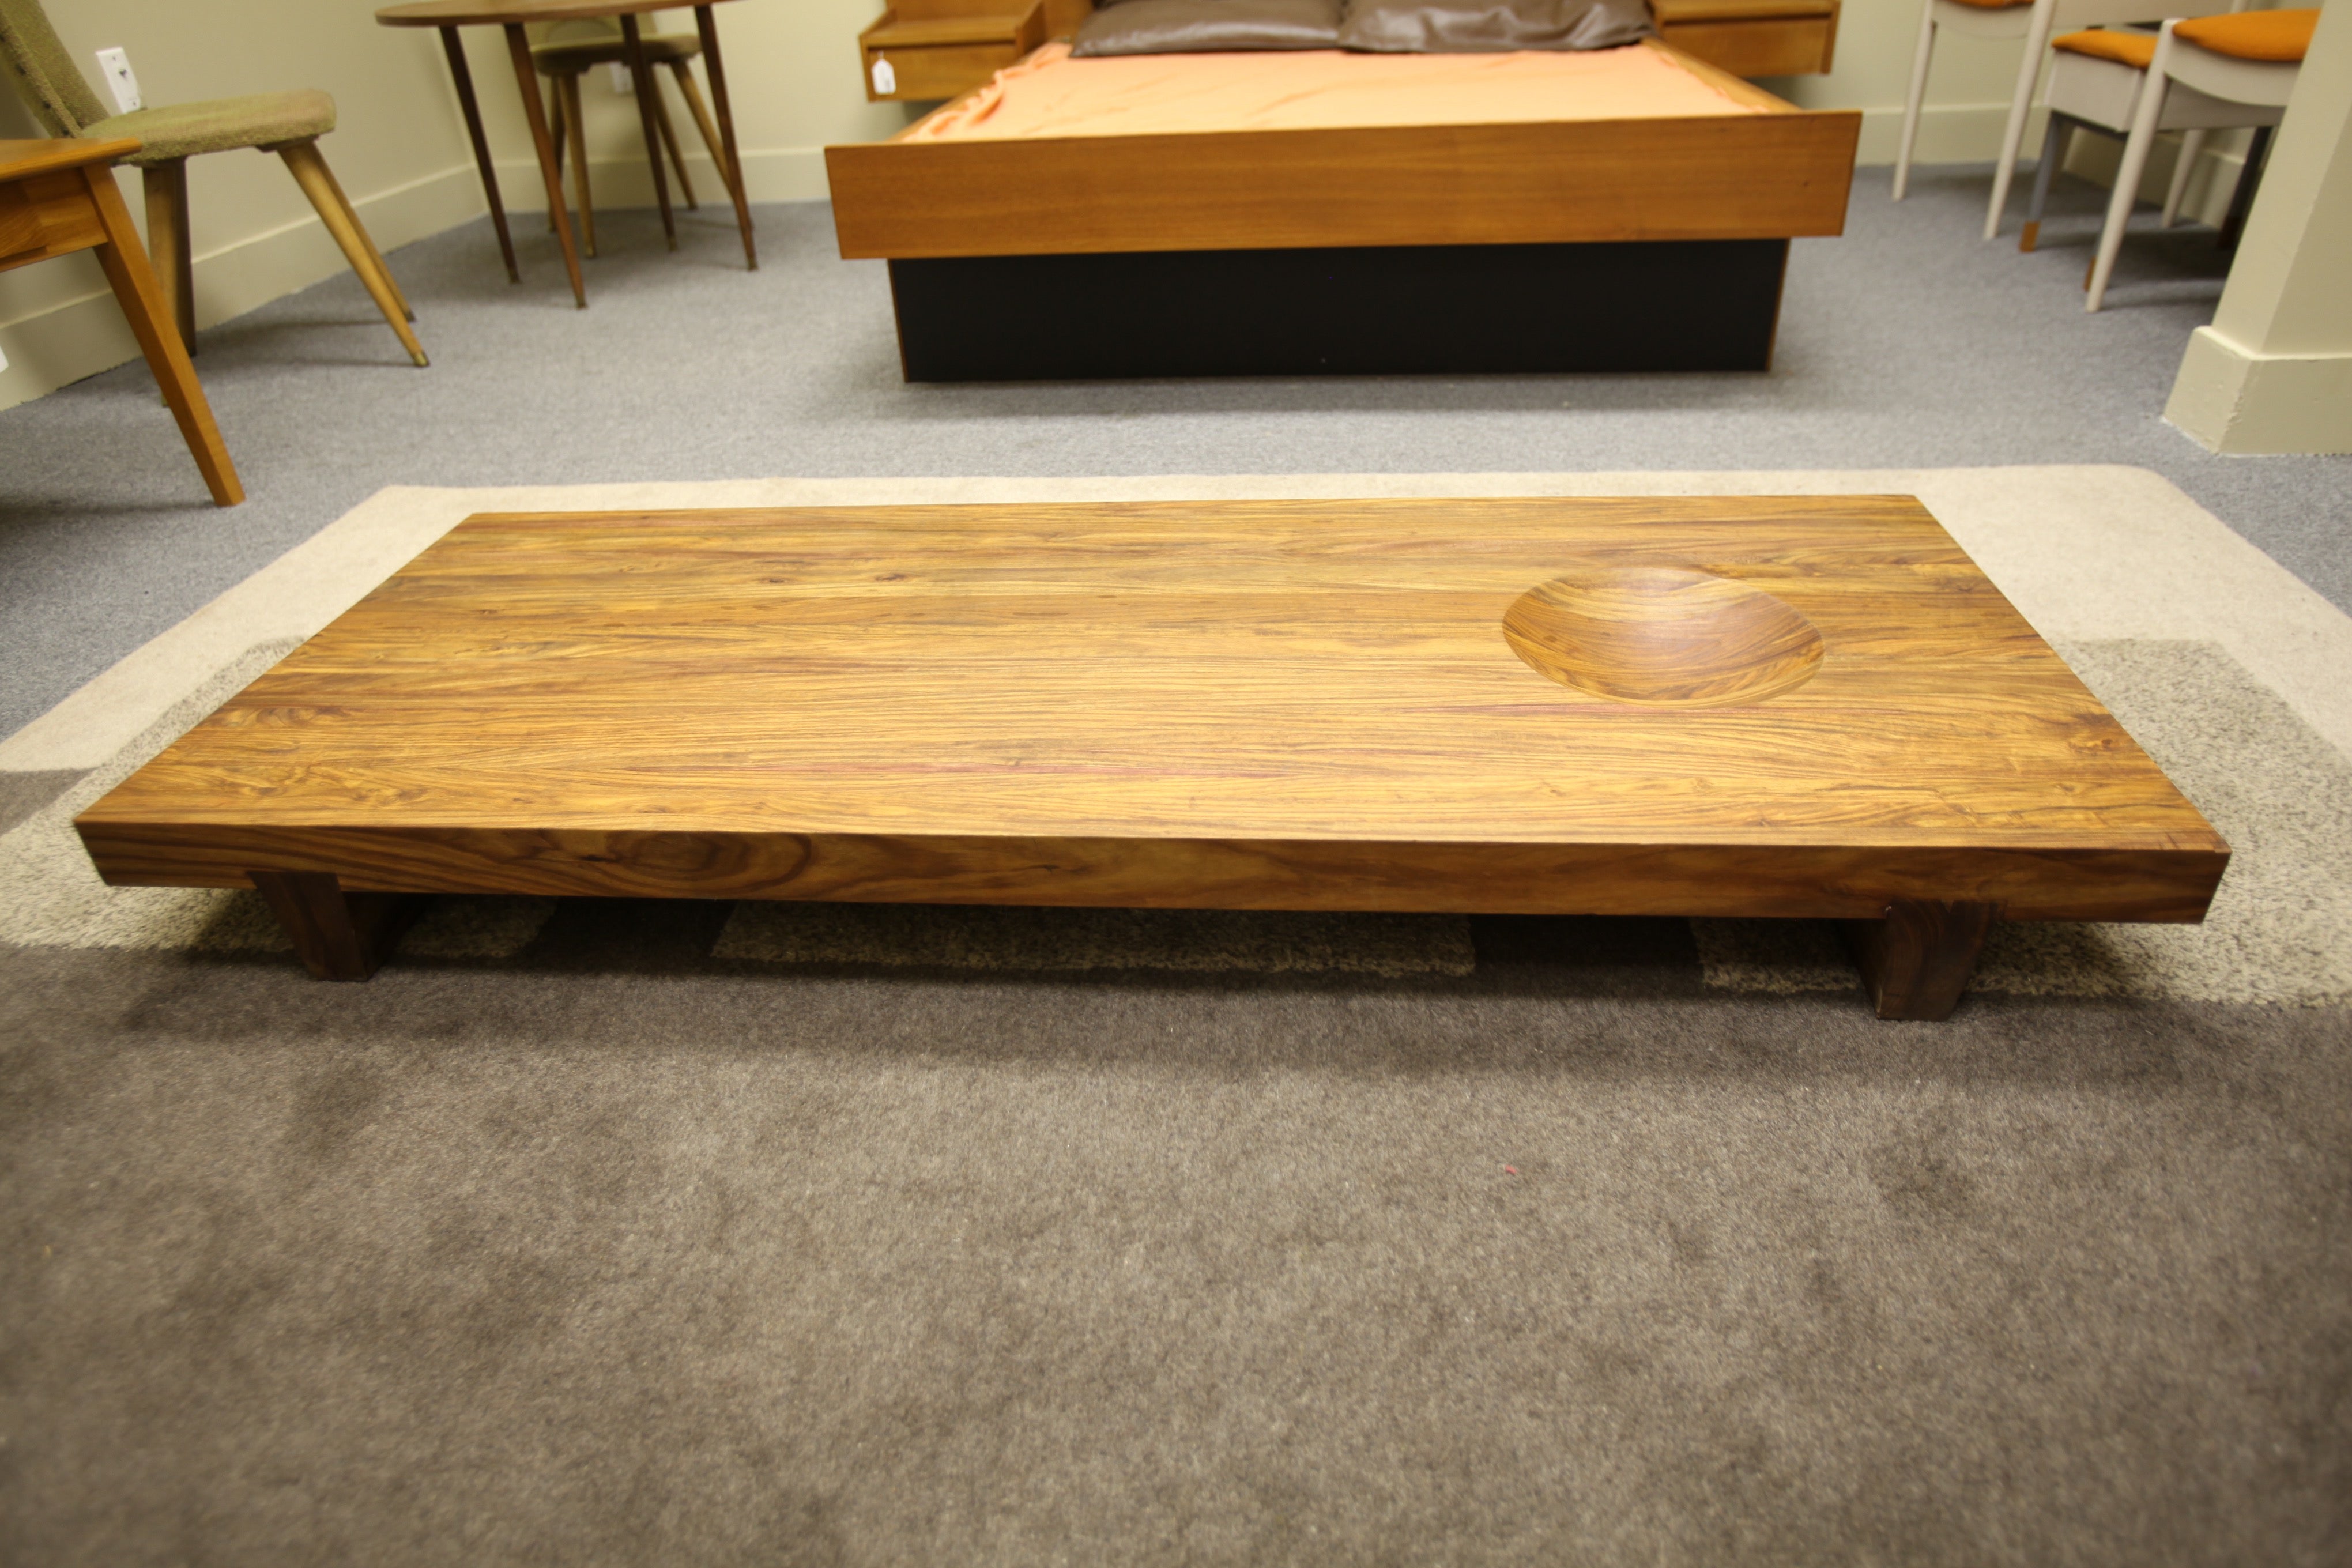 Roost solid wood low coffee Table (59" x 23.75")